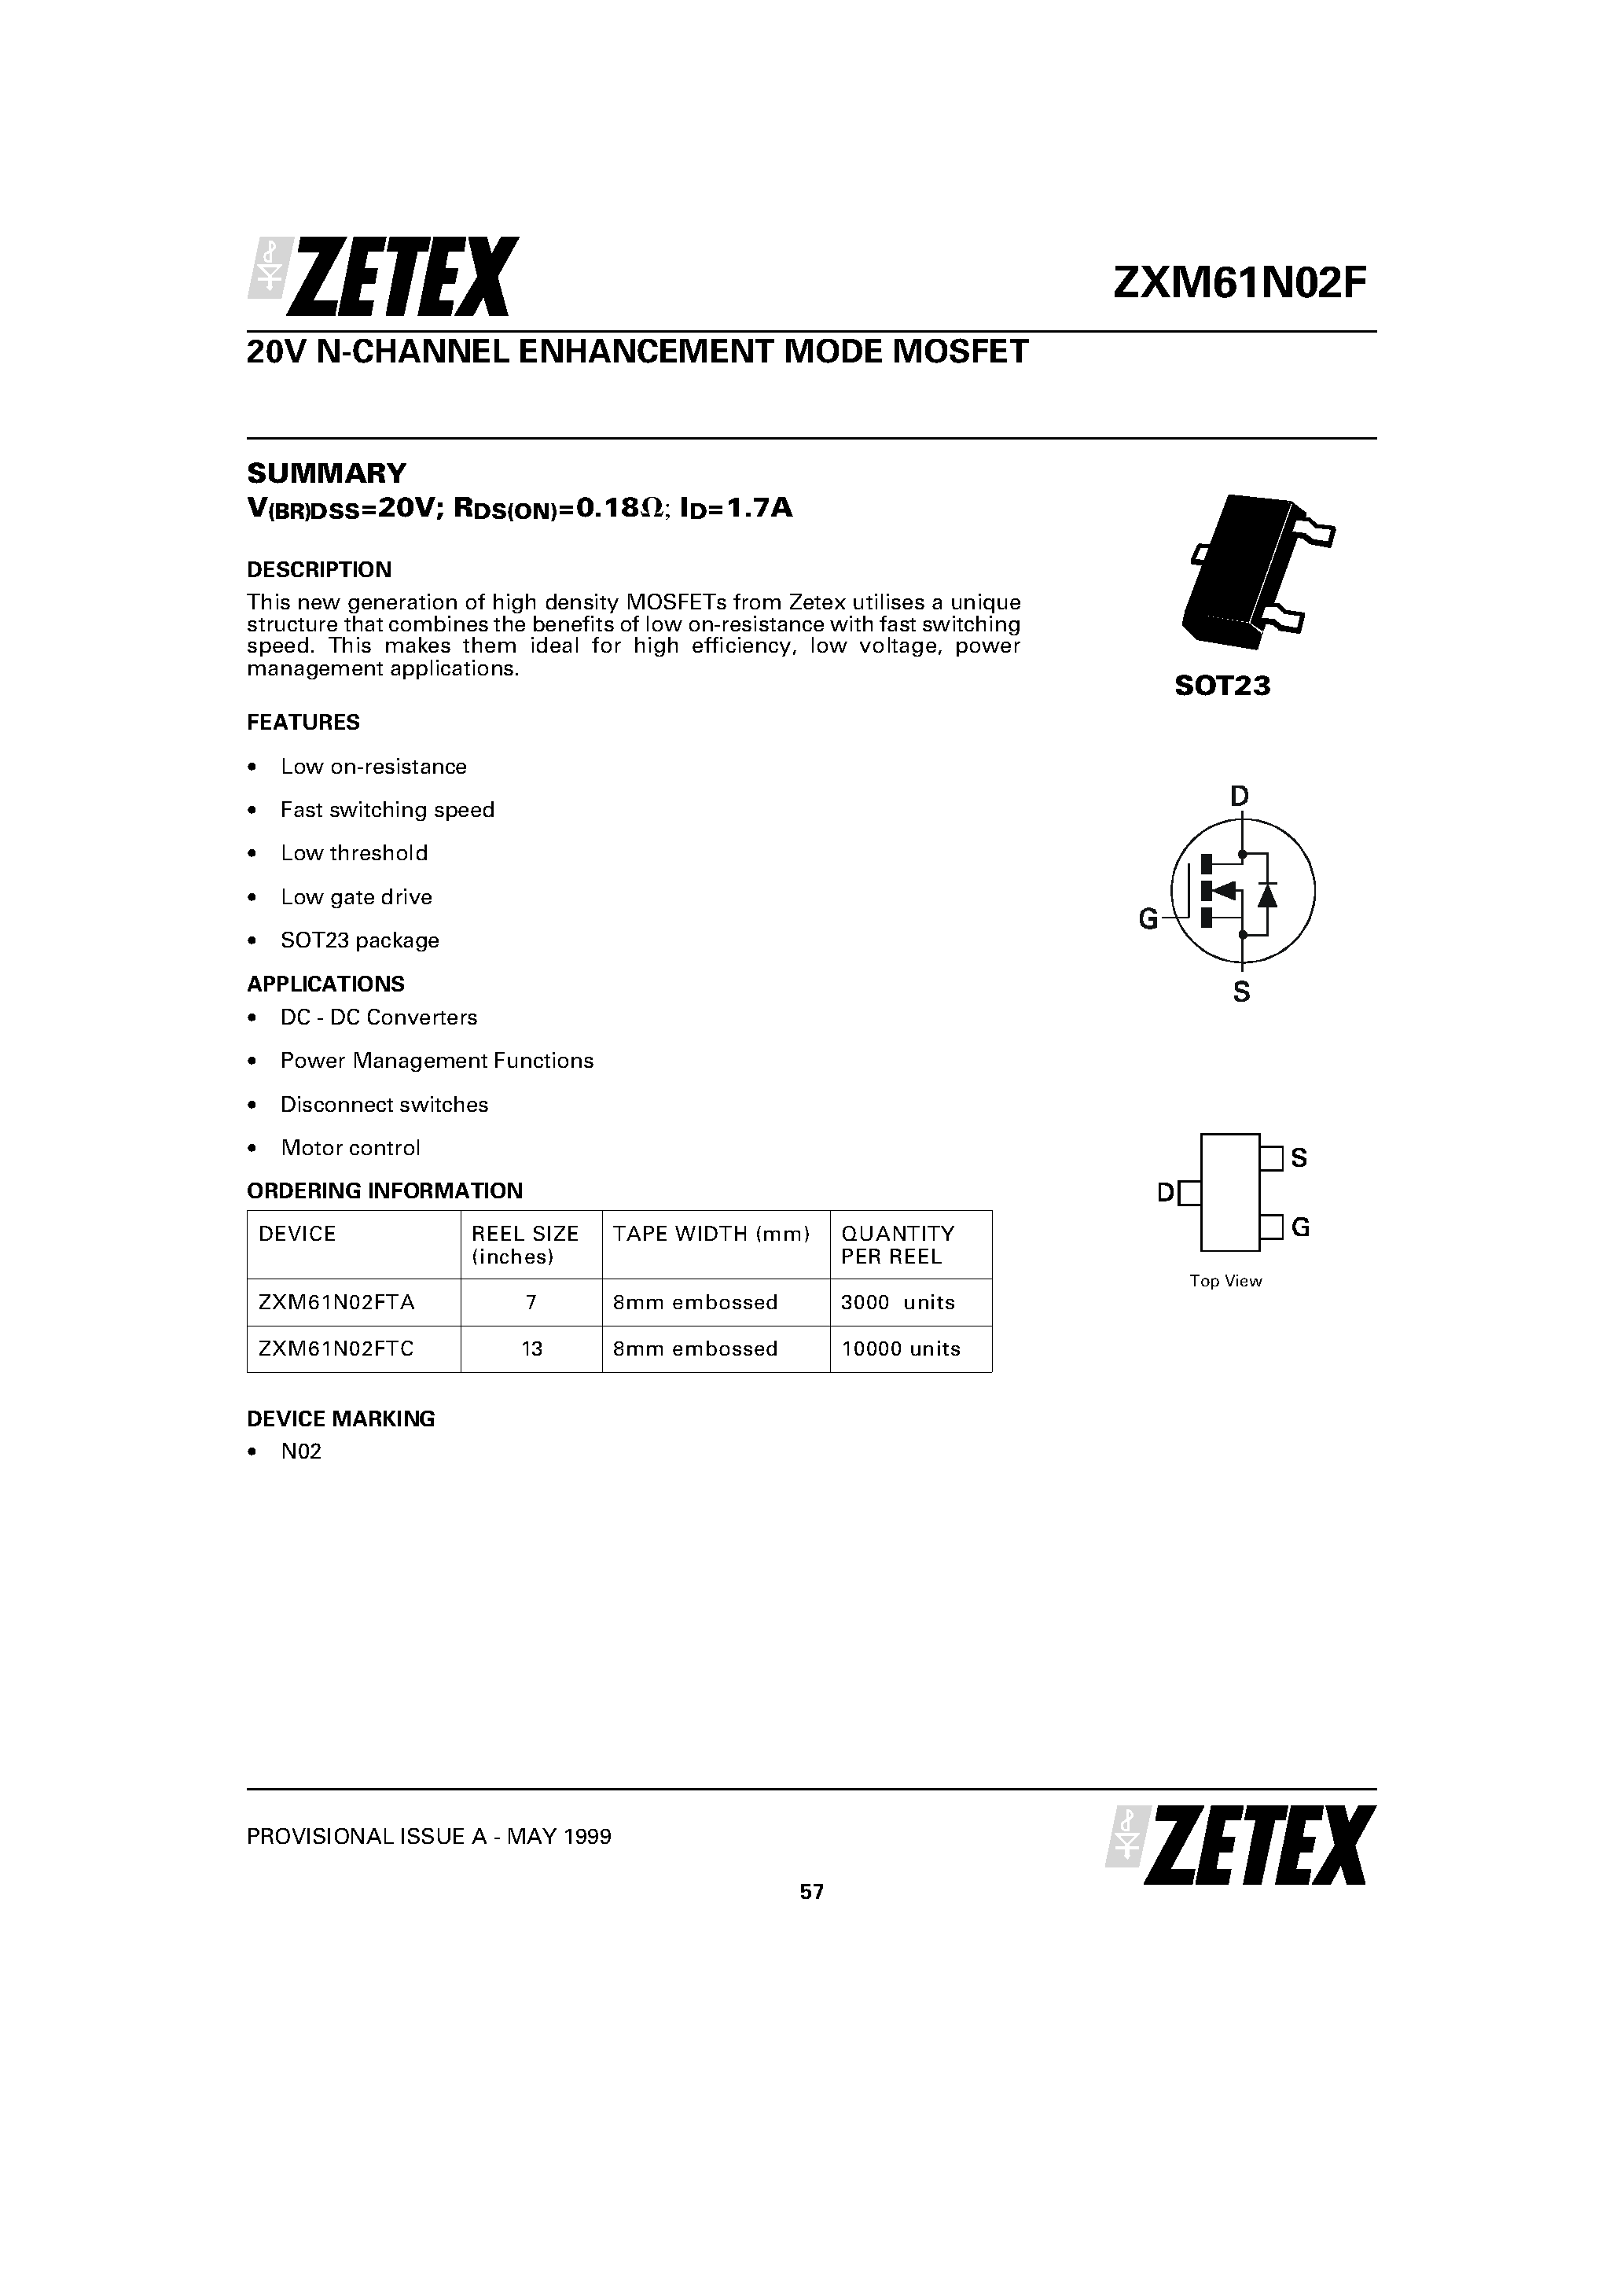 Datasheet ZXM61N02 - 20V N-CHANNEL ENHANCEMENT MODE MOSFET page 1